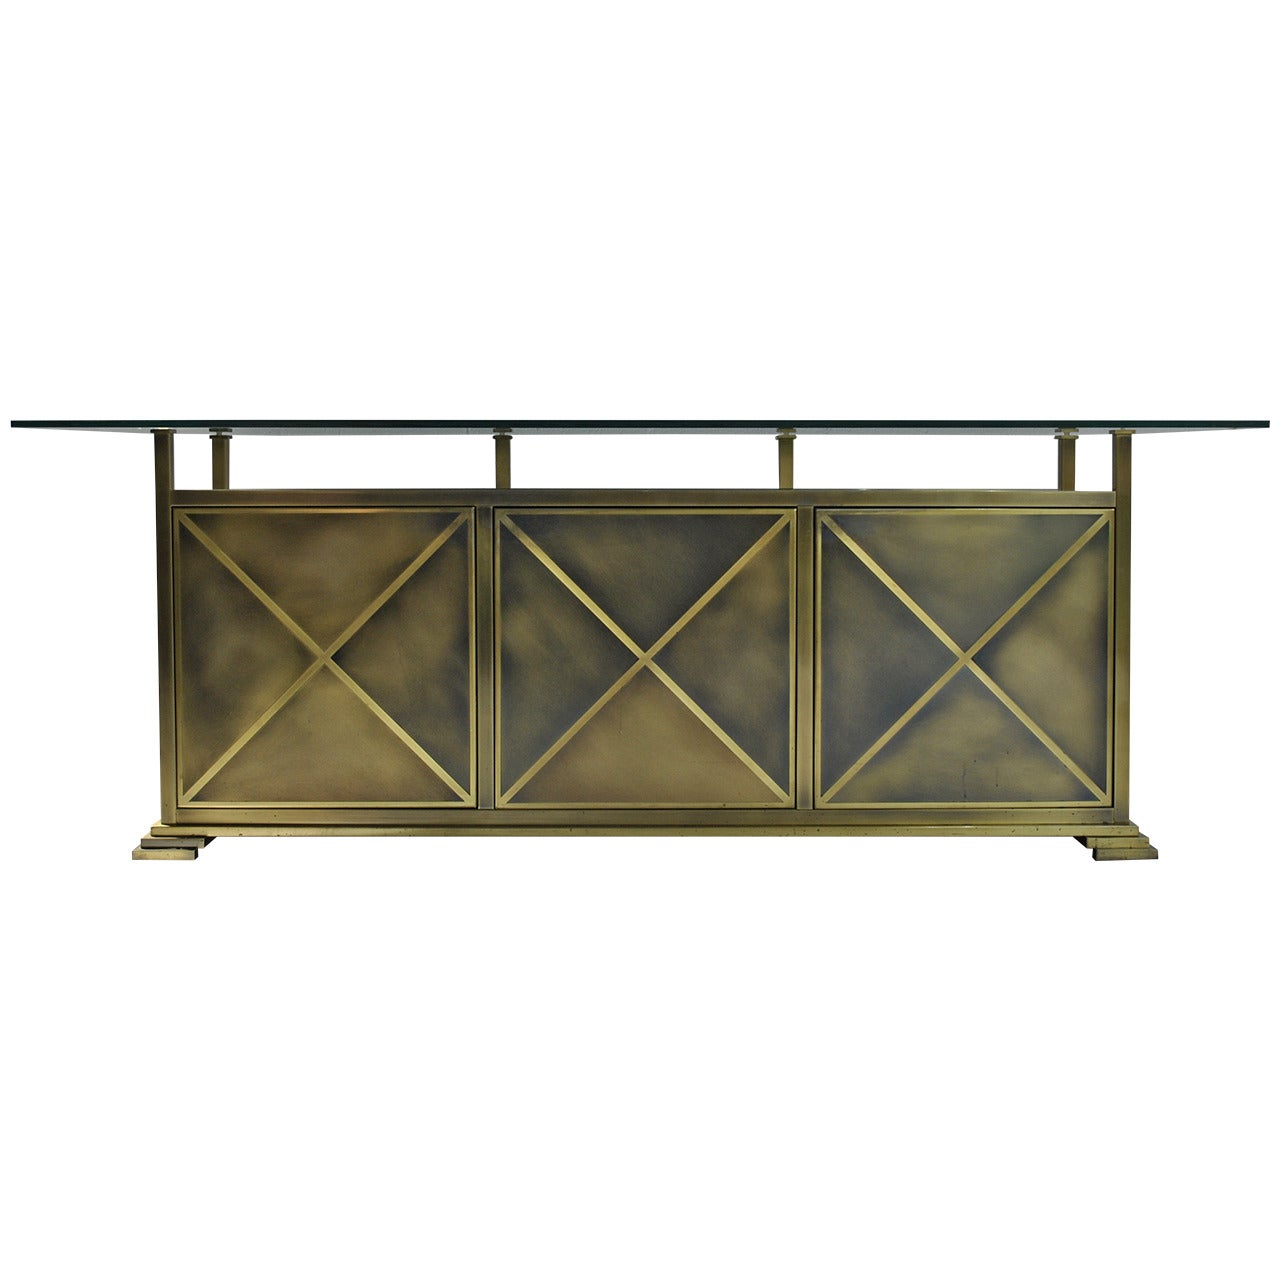 Spectacular Bronze and Brass Neoclassical Sideboard by Belgo Chrome